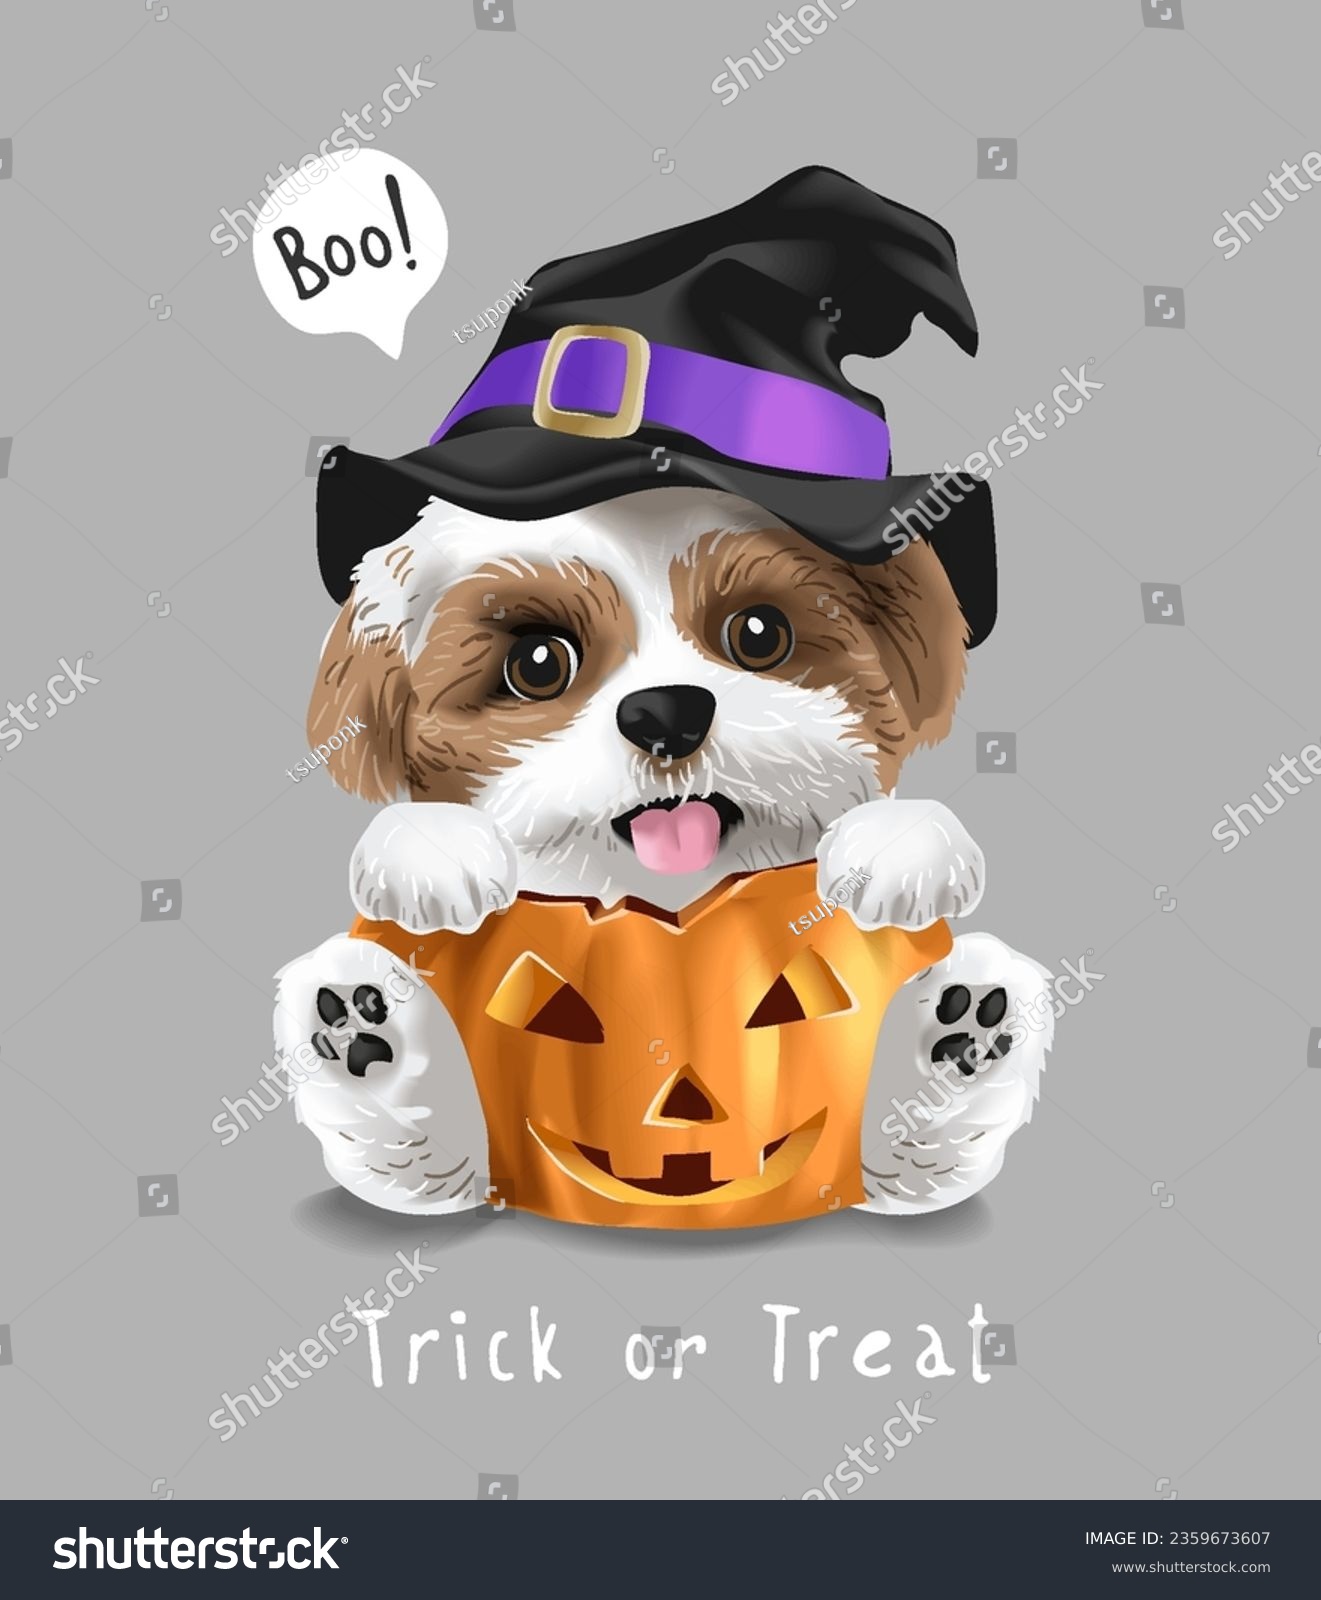 SVG of trick or treat slogan with cute puppy in pumkin and witch hat graphic vector illustration svg